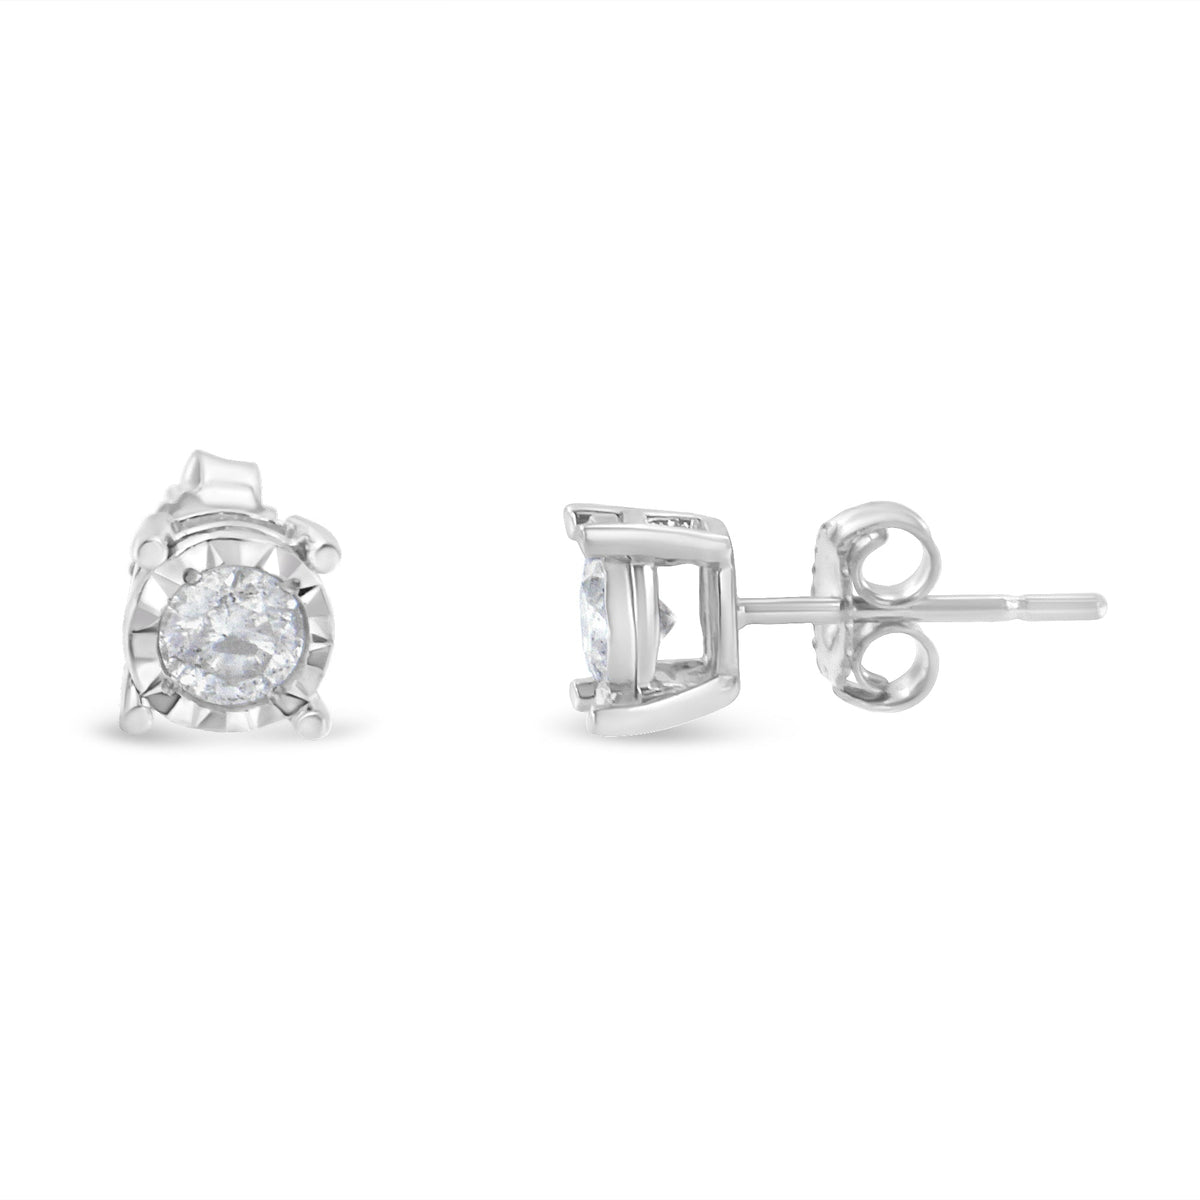 .925 Sterling Silver 1/2 Cttw Near Colorless Round Brilliant-Cut Diamond Miracle-Set Stud Earrings (H-I Color, I2-I3 Clarity) - LinkagejewelrydesignLinkagejewelrydesign